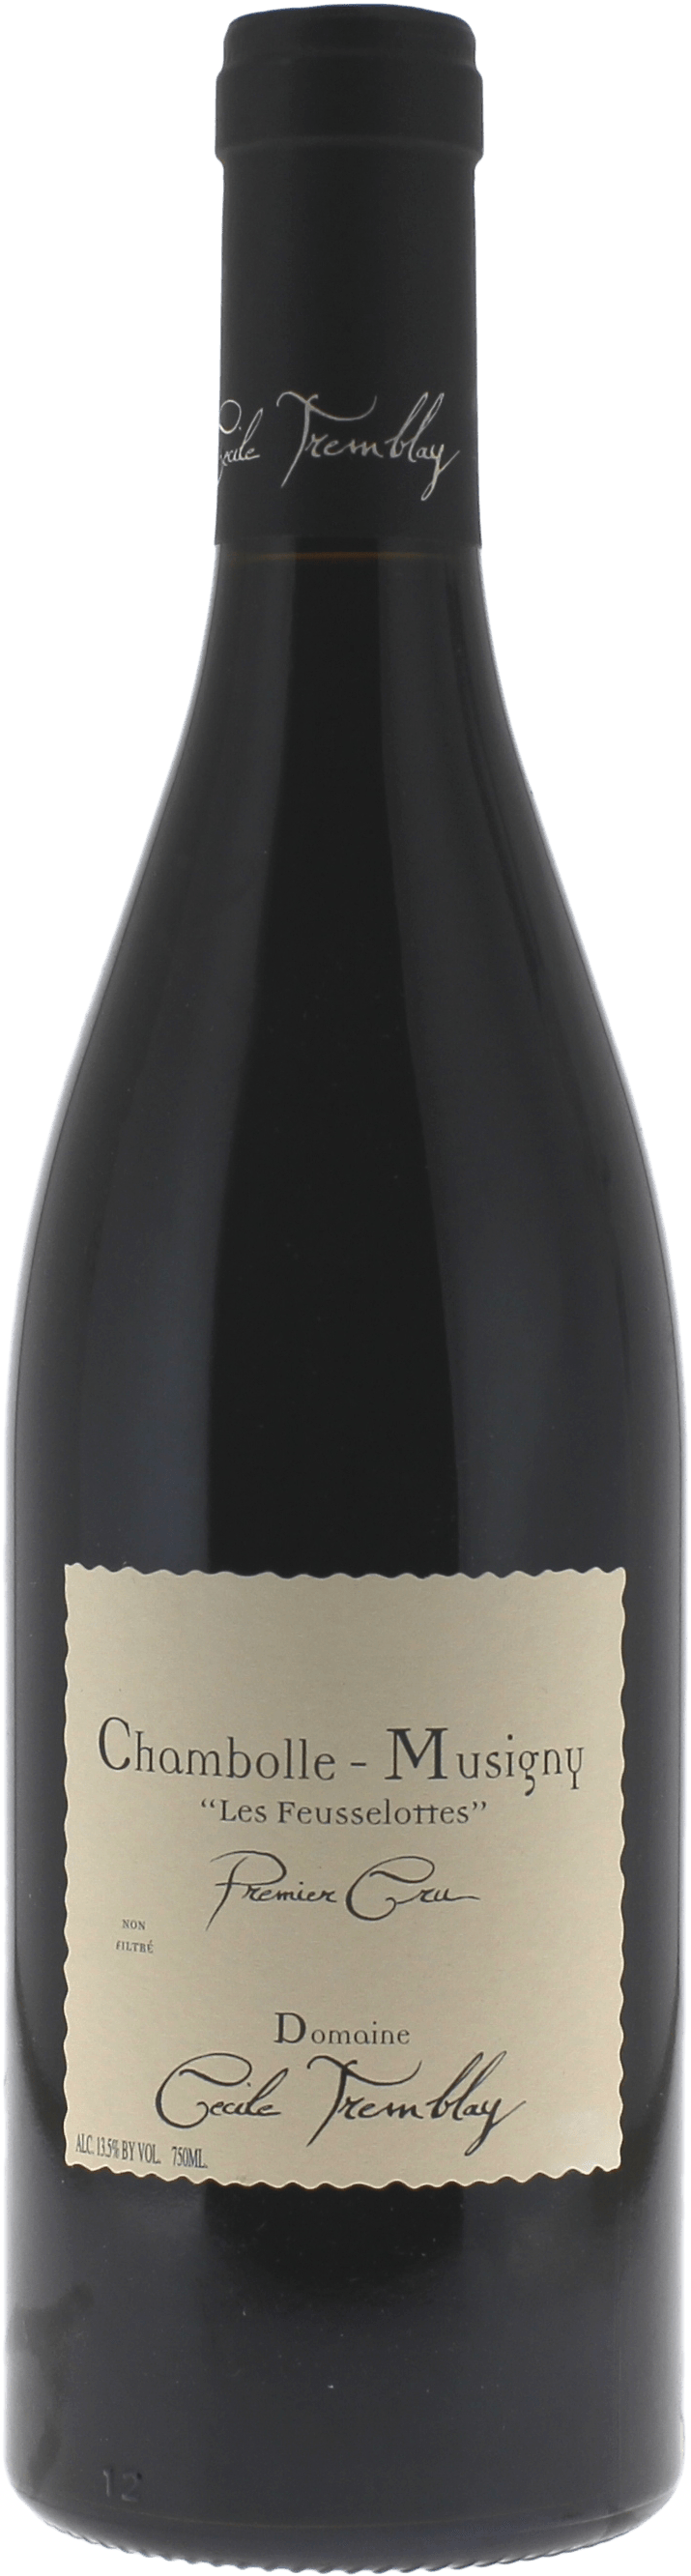 Chambolle musigny 1er cru feusselottes 2015 Domaine TREMBLAY Cecile, Bourgogne rouge